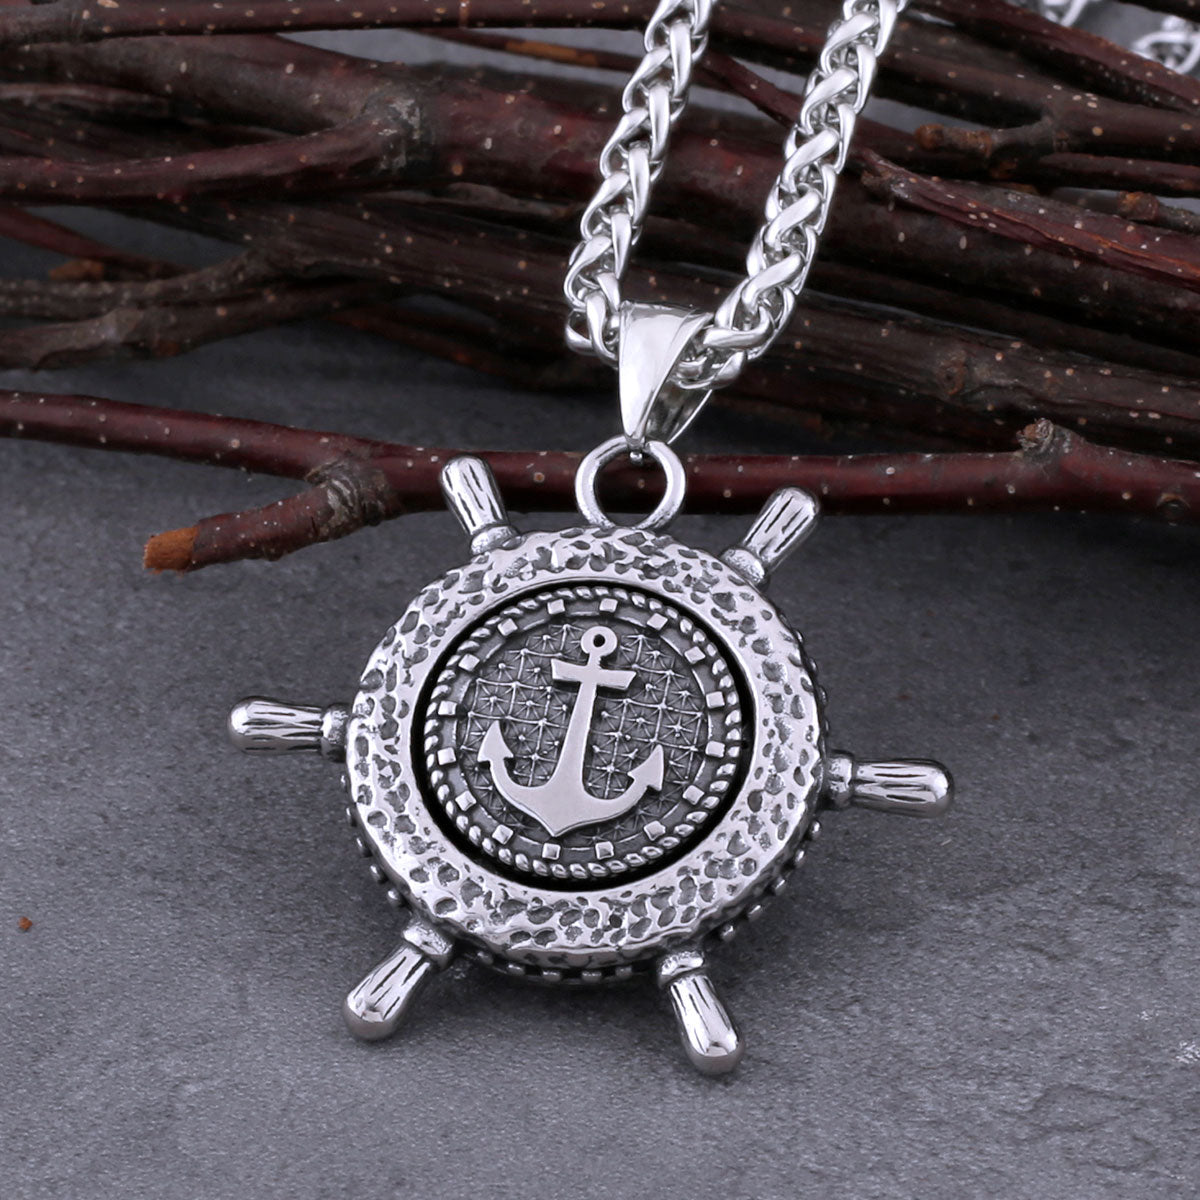 Viking Anchor Necklace Featuring A Nordic Rudder Pendant